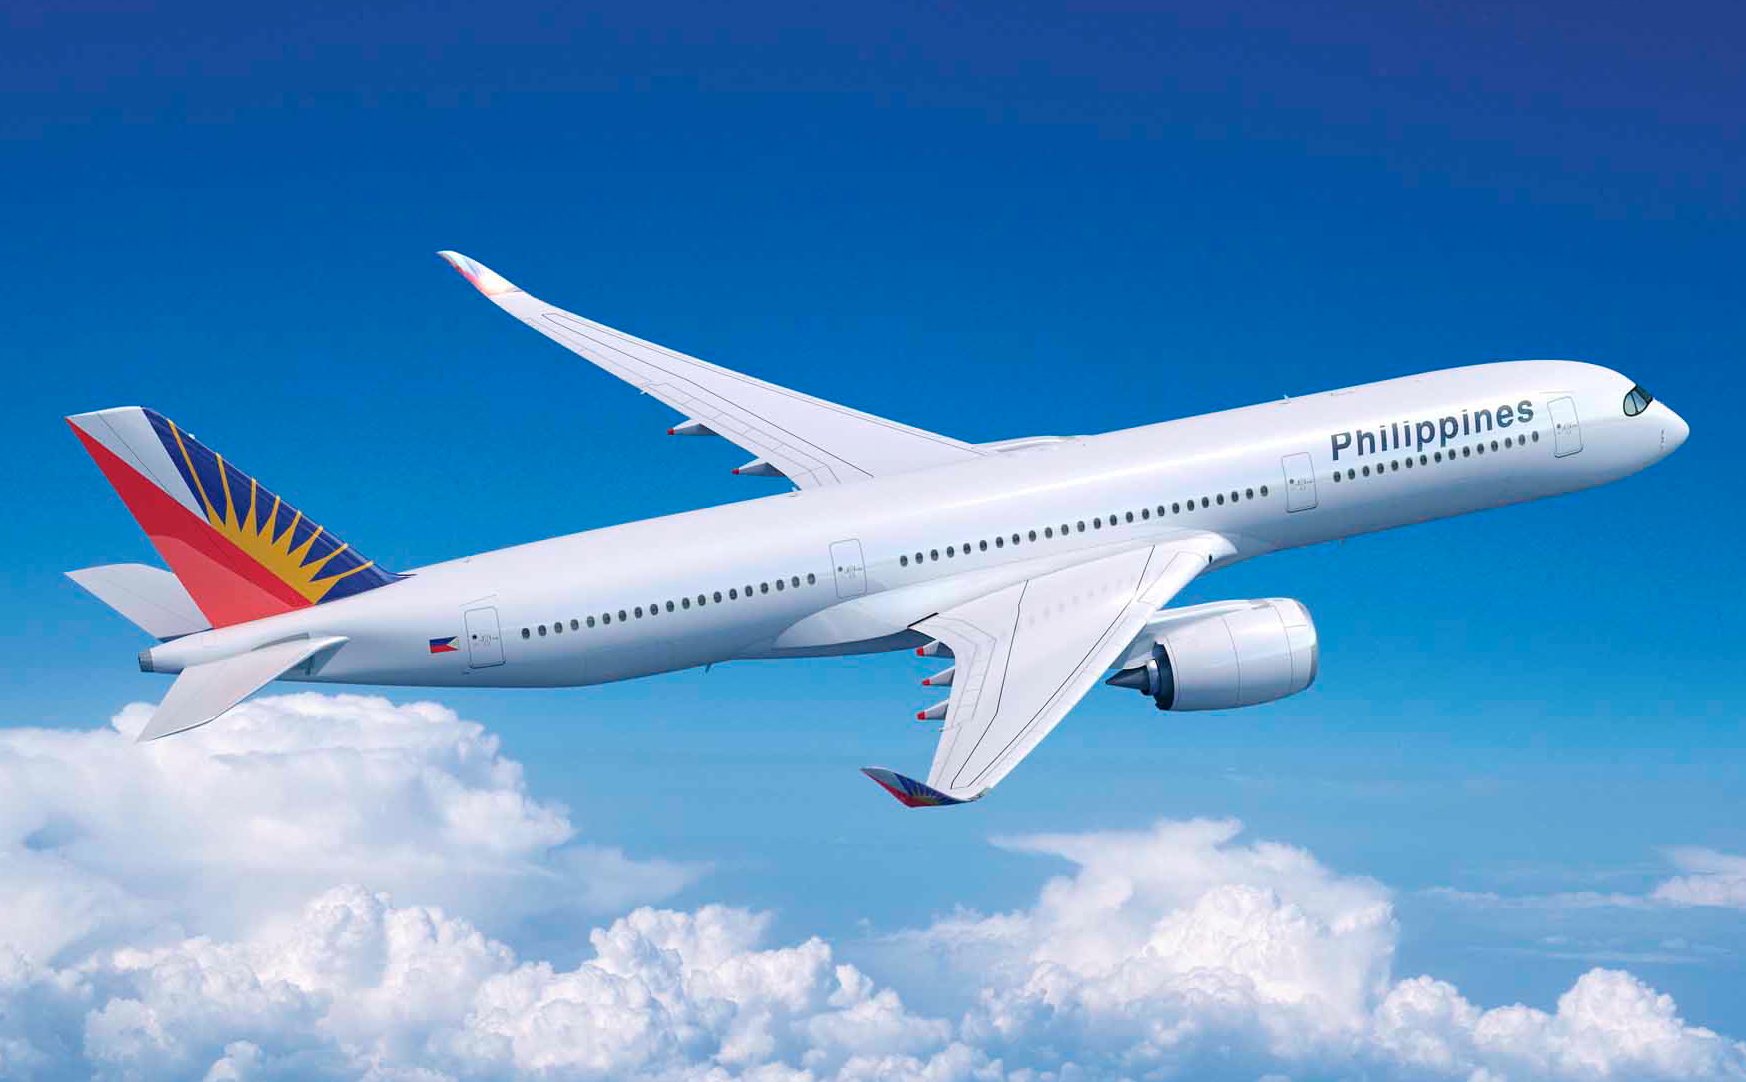 Philippine Airlines currently uses Boeing 777-300ER to operate the polar route, however Airbus A350 aircraft (pictured) will also be used for these flights in 2018. Click to enlarge.